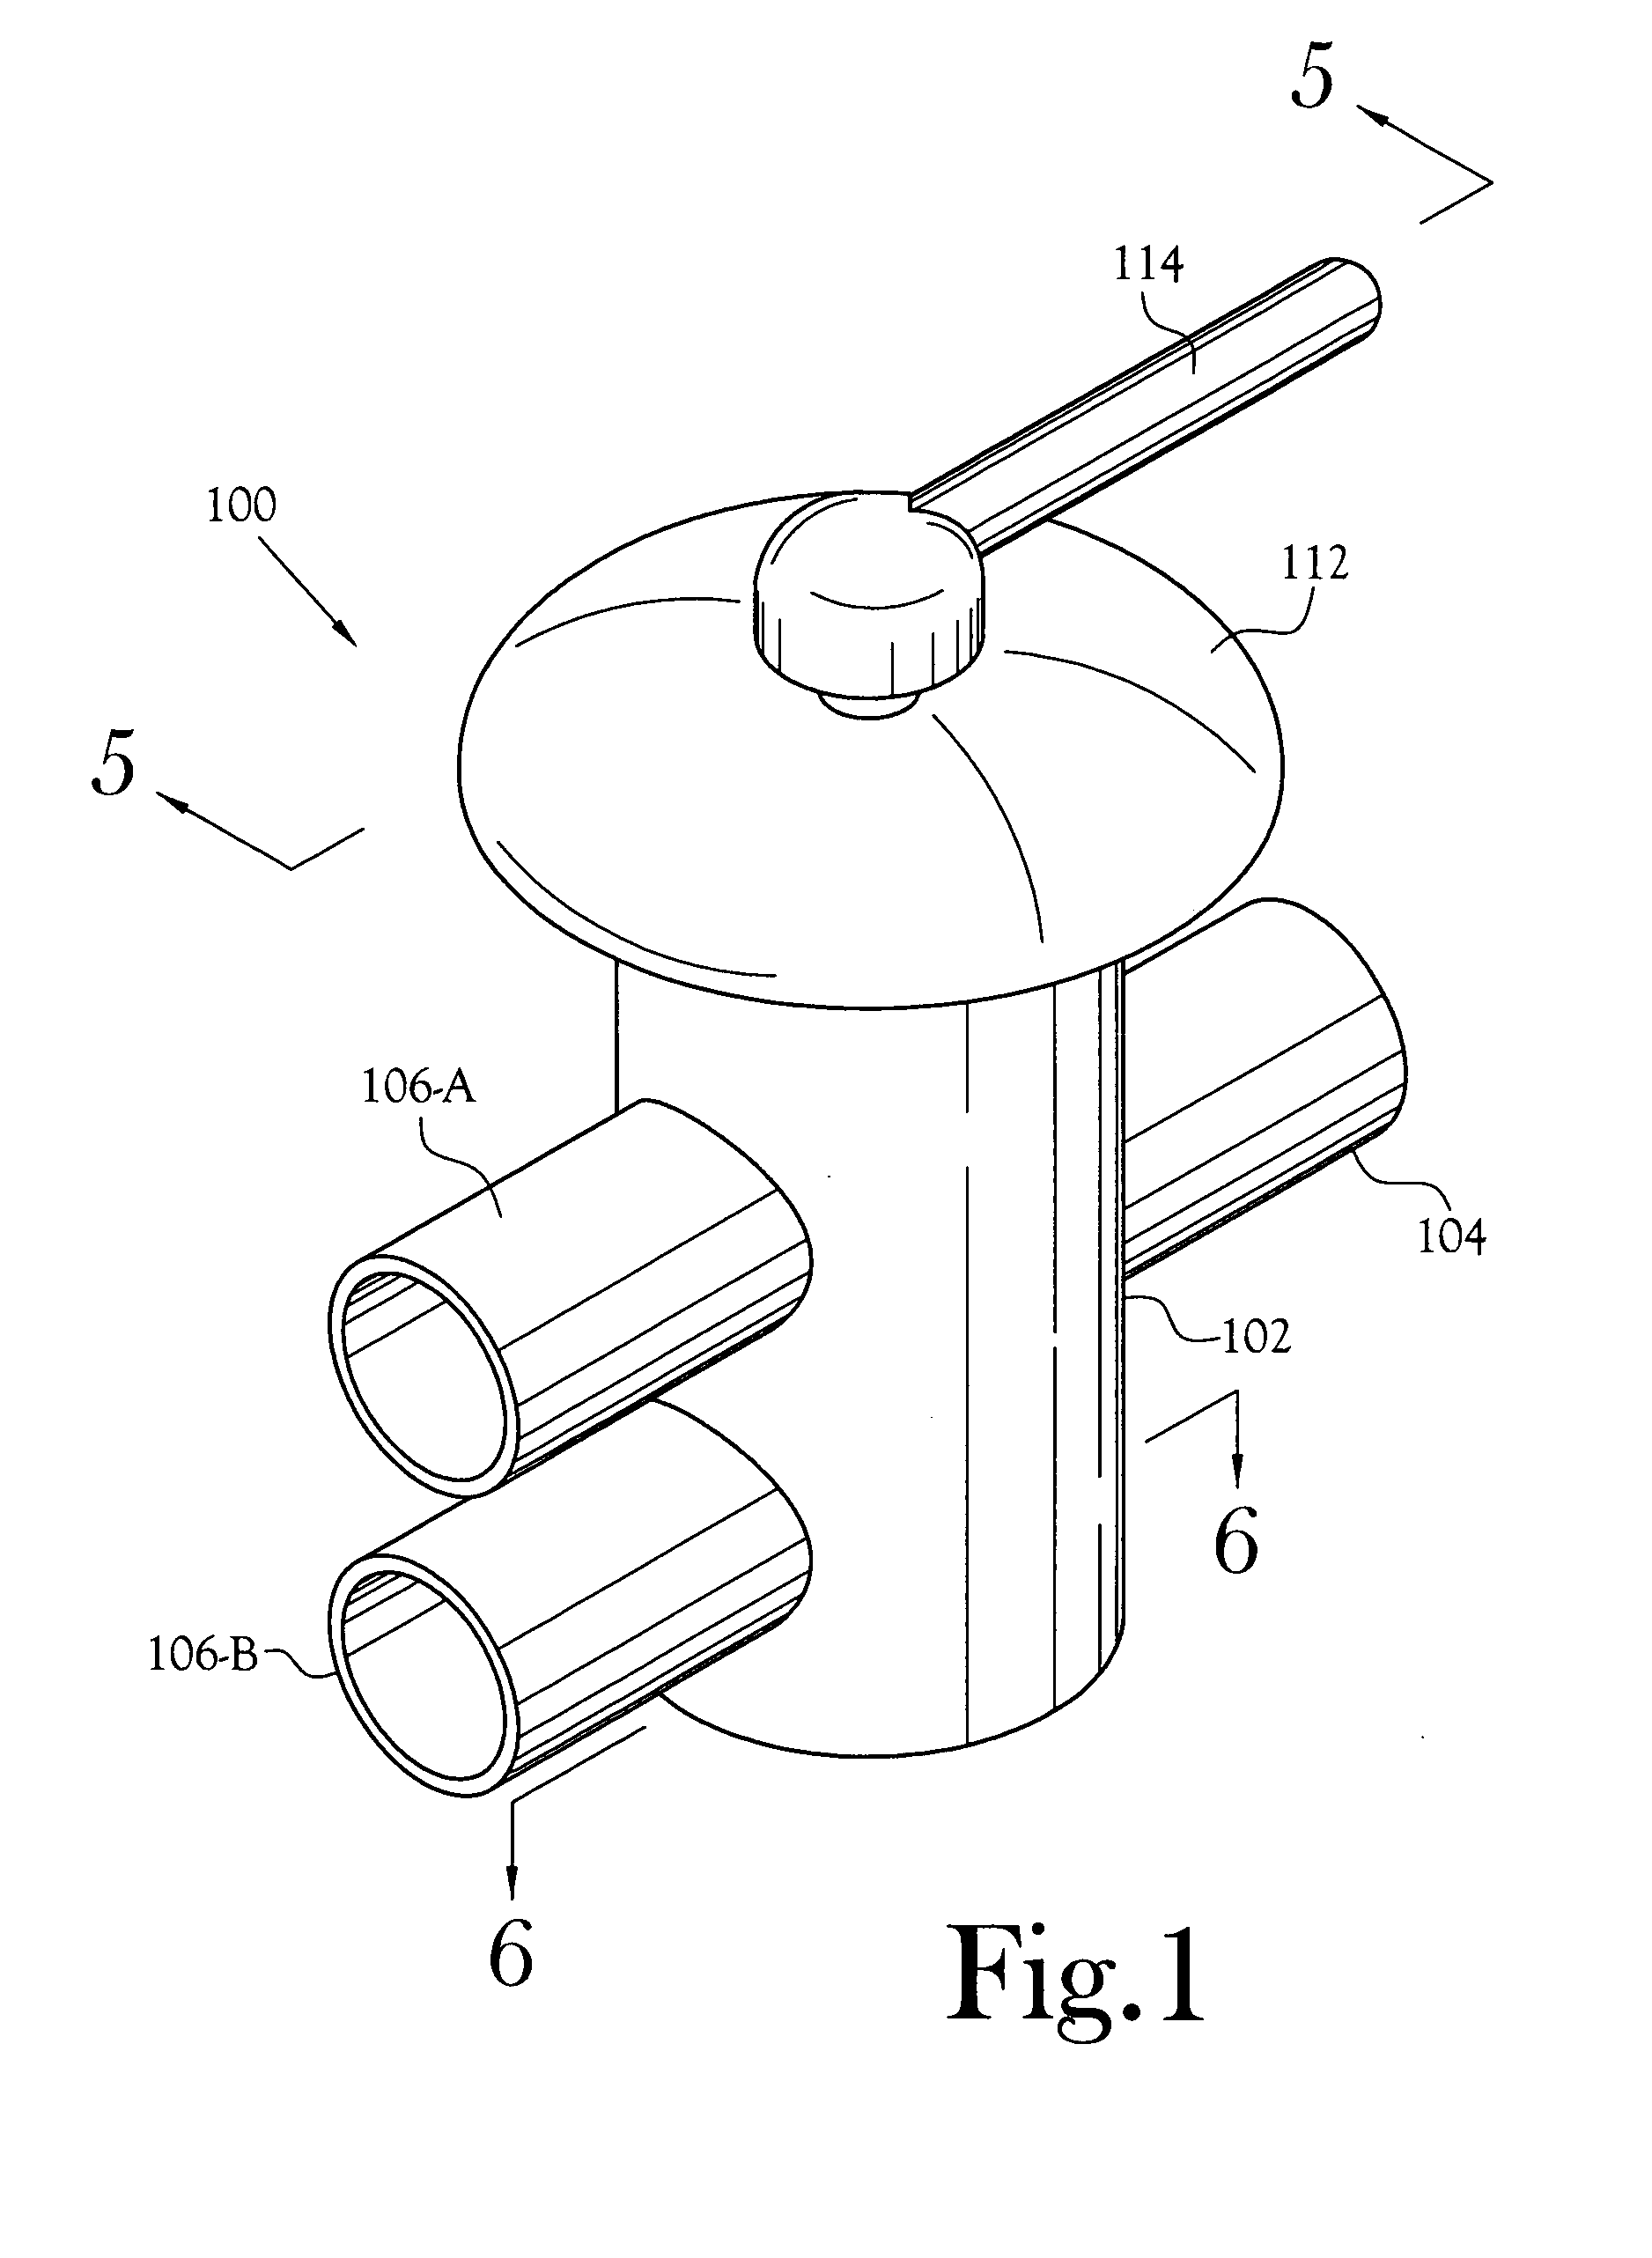 Diverter valve for water systems